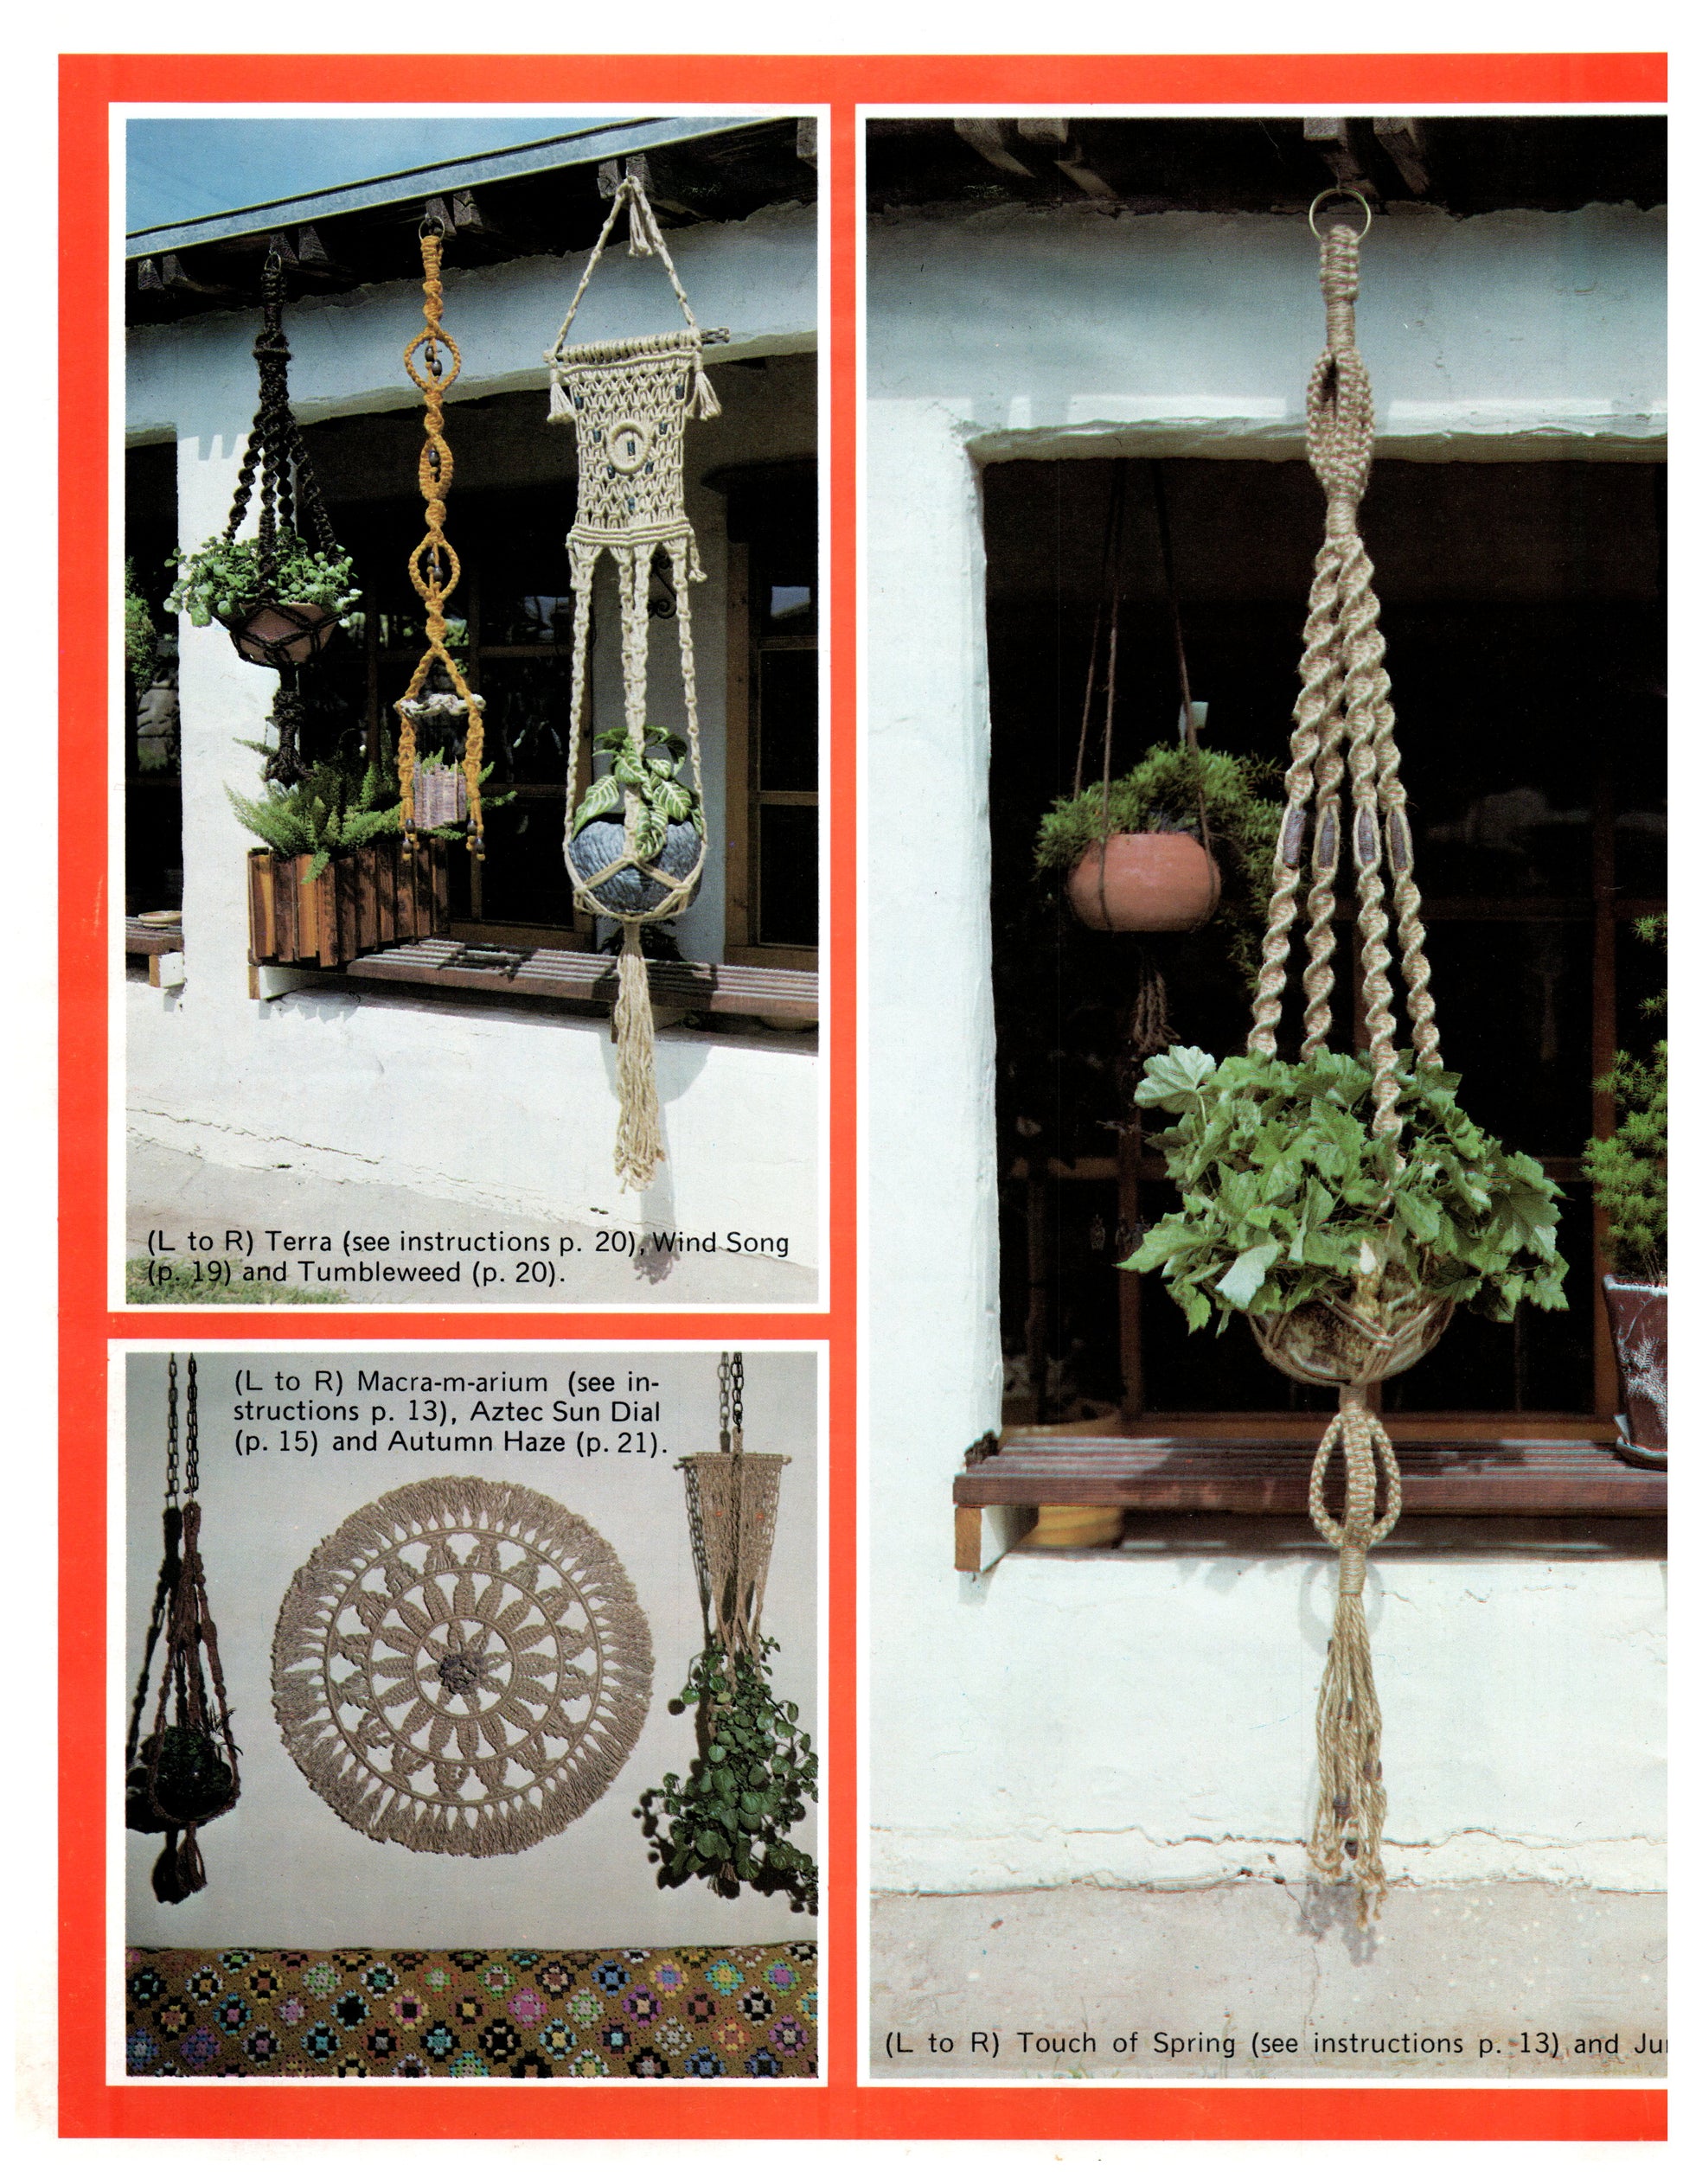 Vintage Macrame Hangers Pattern Book Plant Holders Hangings Knots Knotted Download PDF Instructions Home Decorating - At Grandma's Table